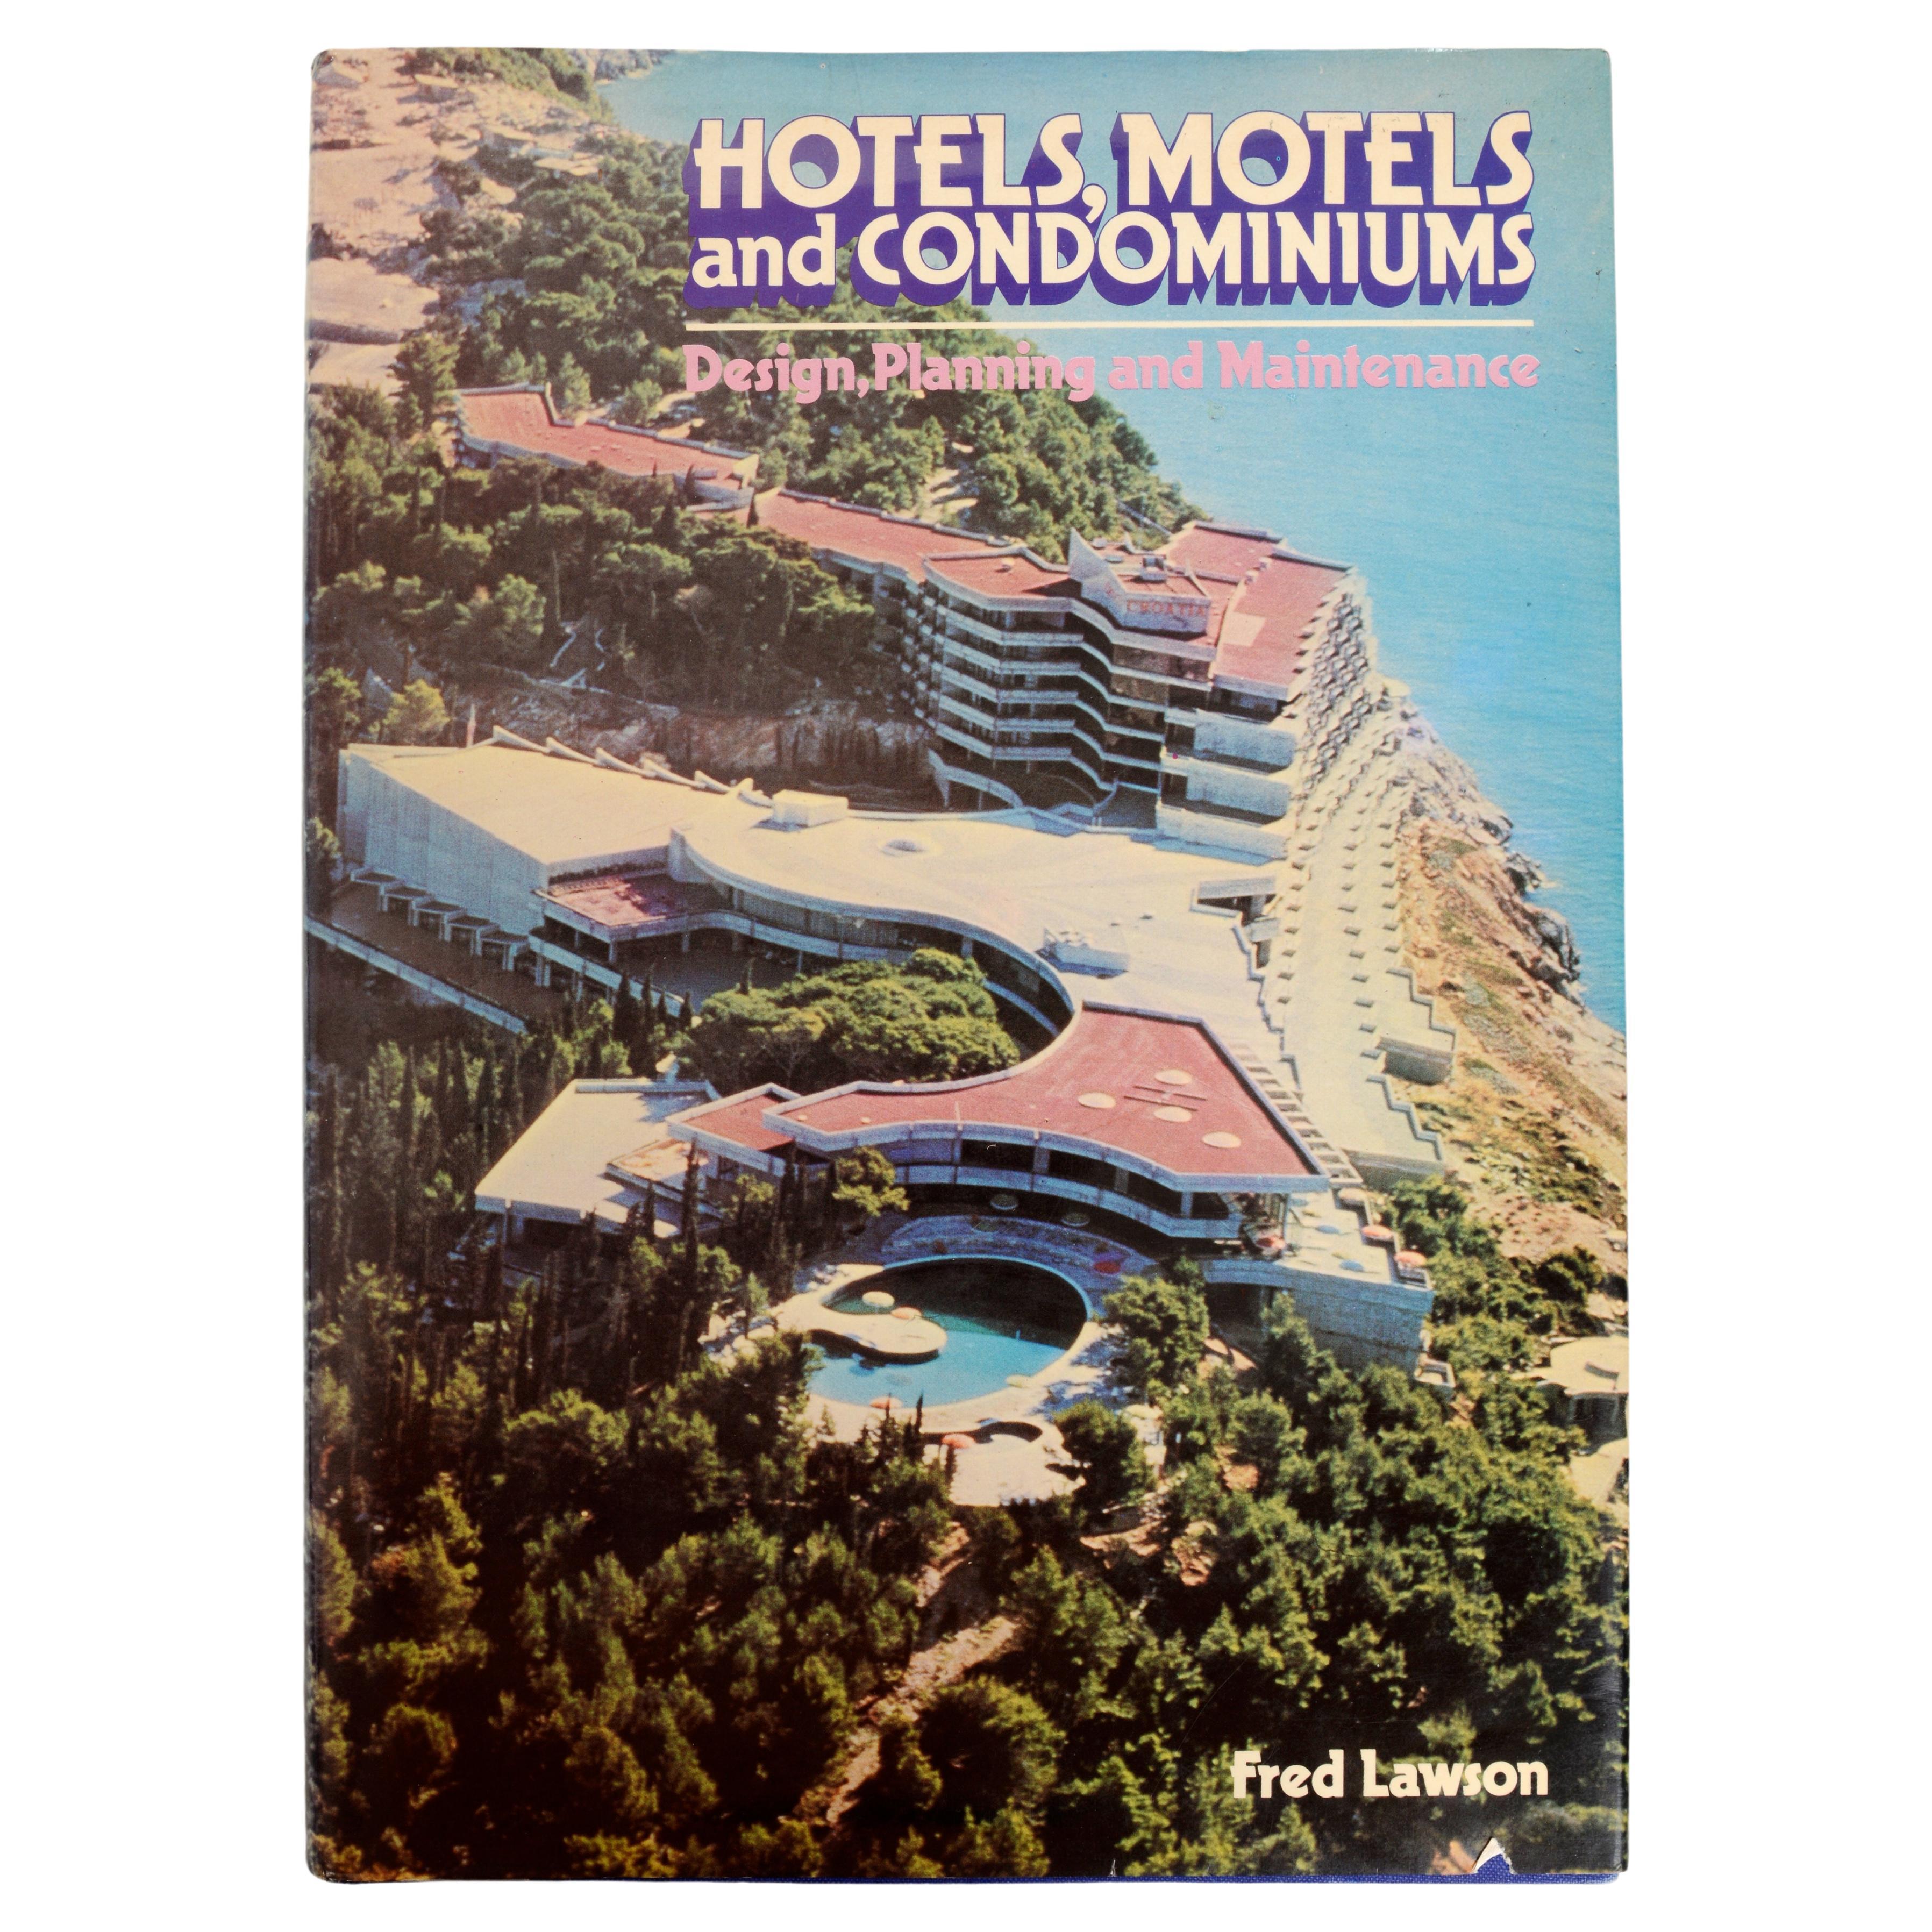 Hotels, Motels & Condominiums Planning, Design & Maintenance by Fred Lawson